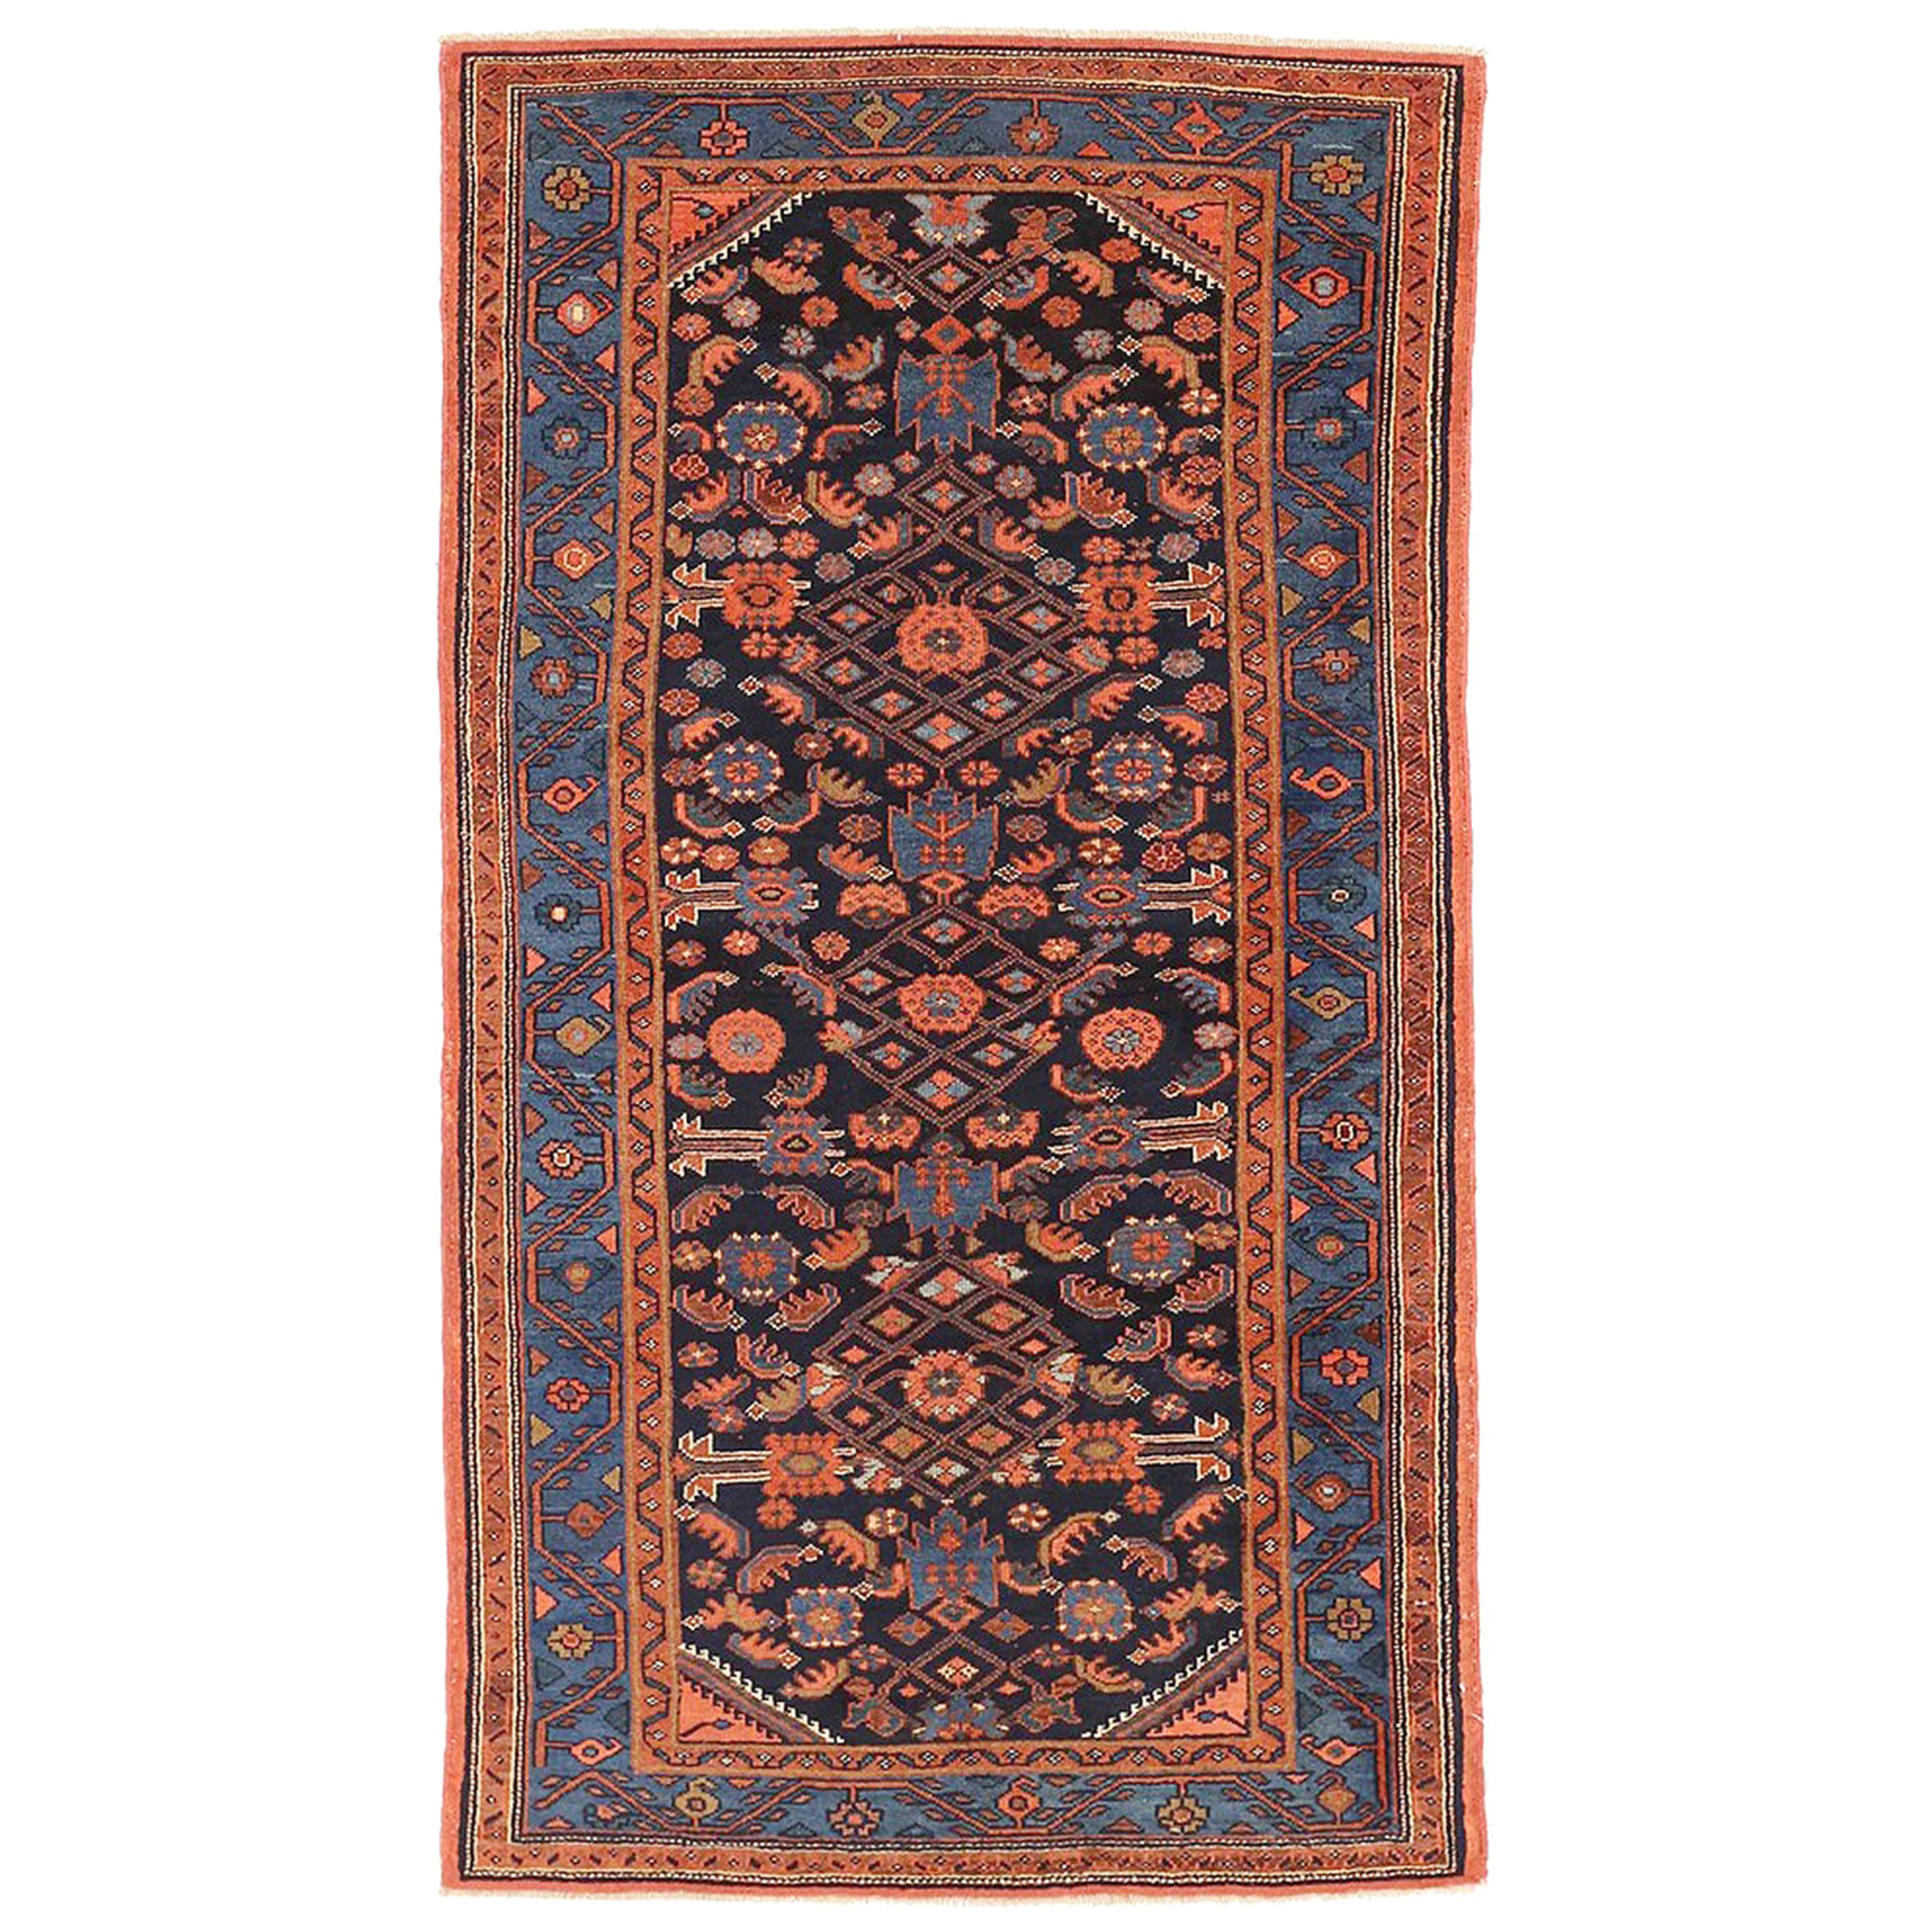 Antique Persian Hamadan Rug with Navy and Red Floral Details on Black Field